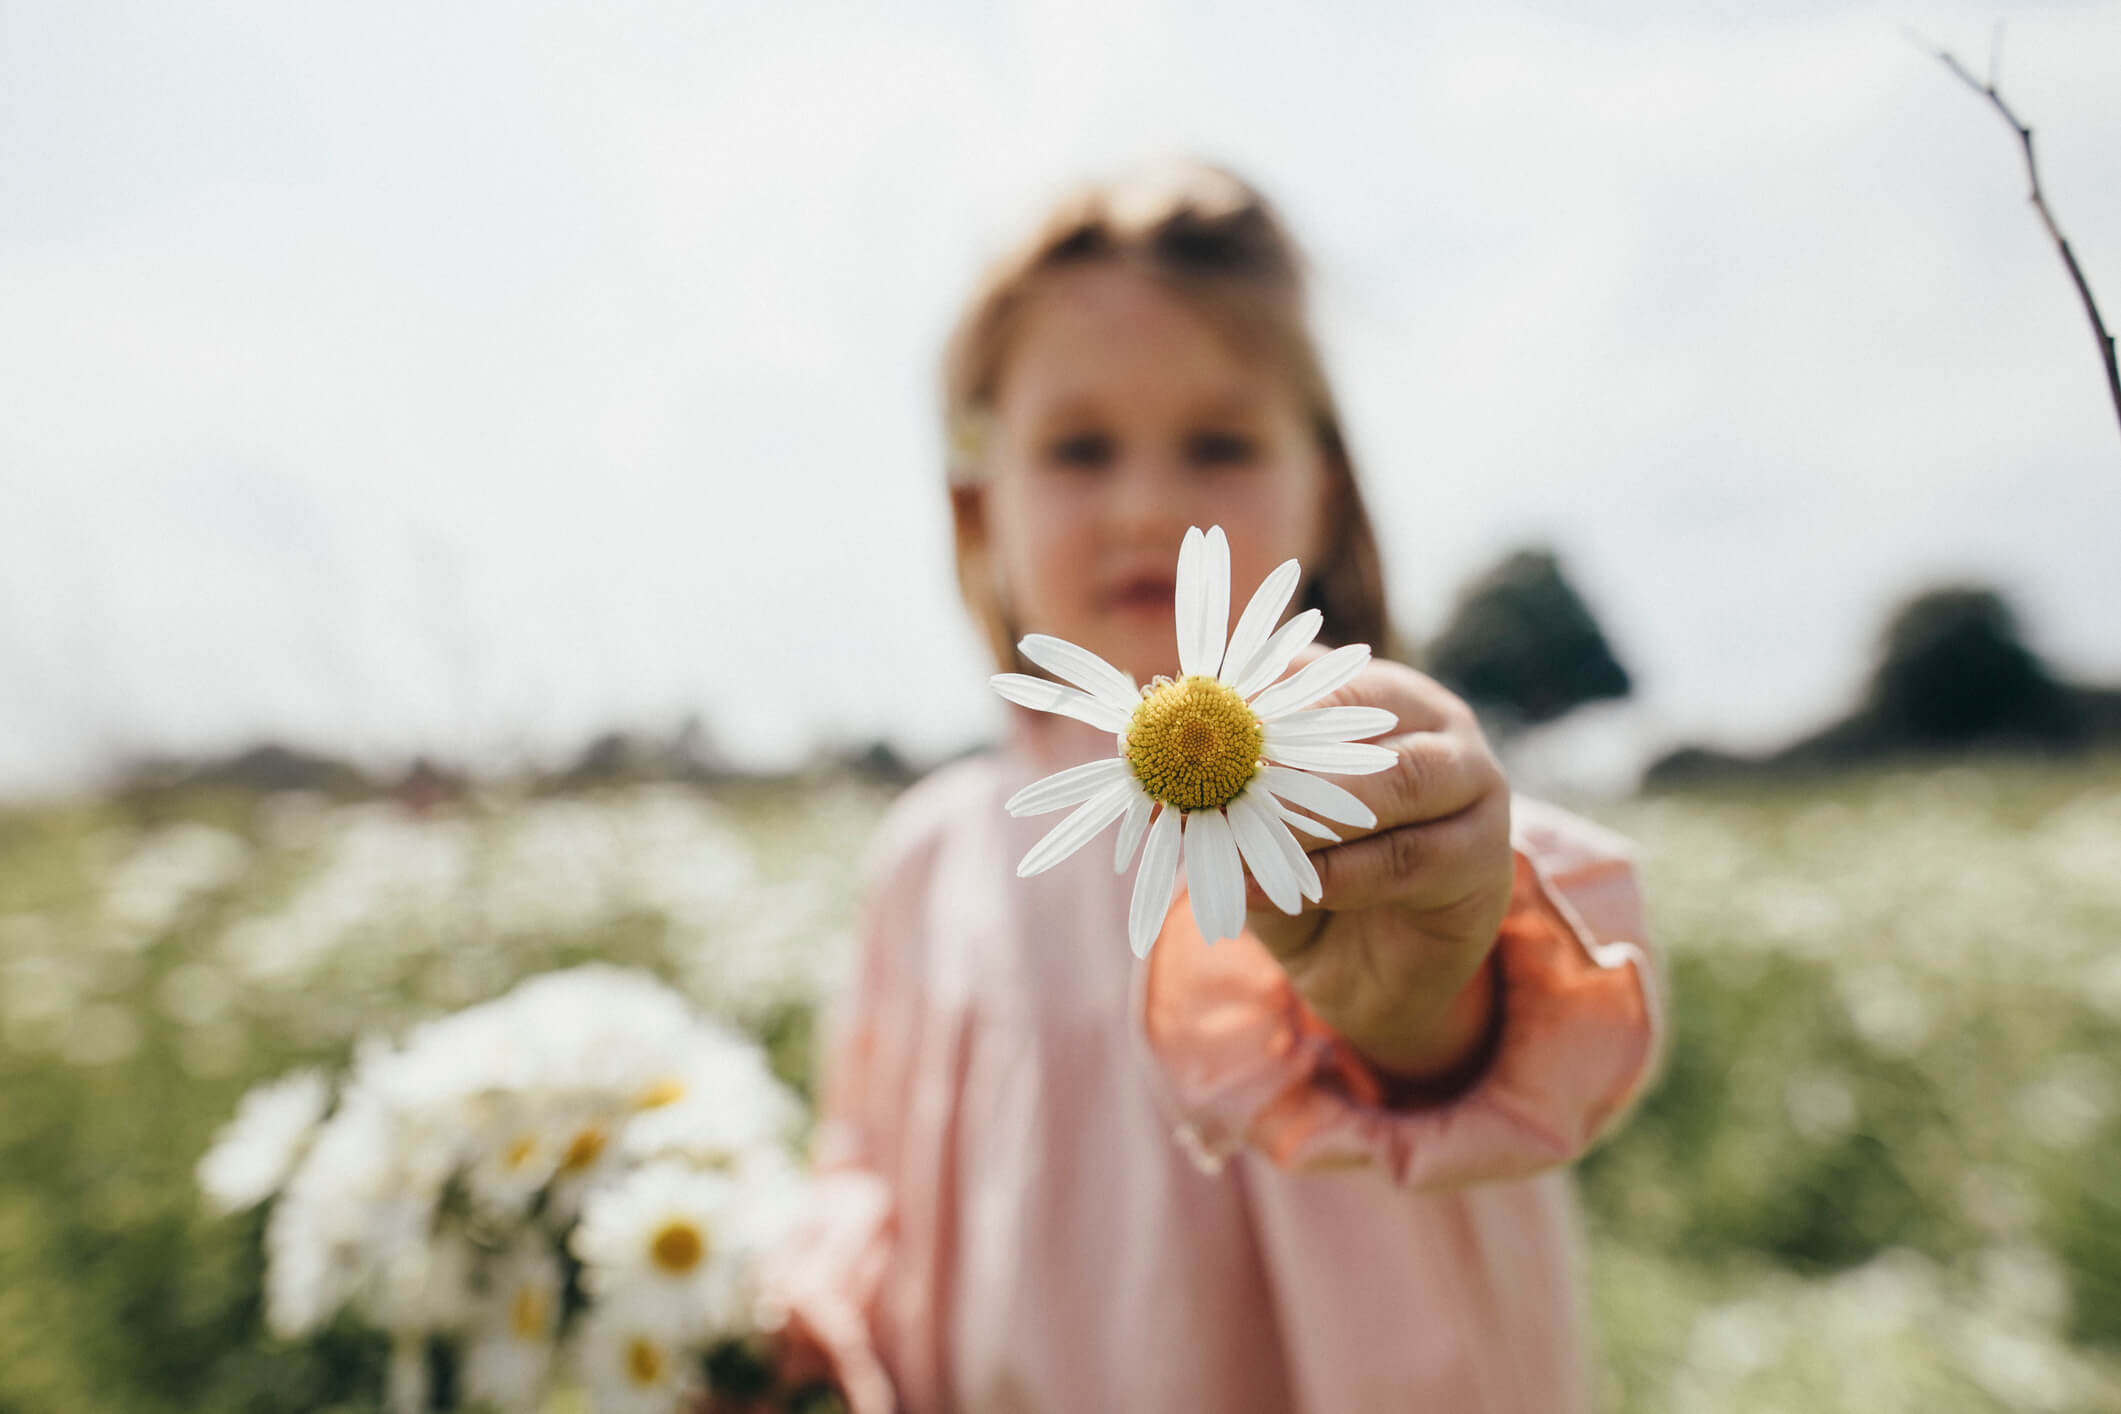 A shallow focus show of a young girl holding a flower